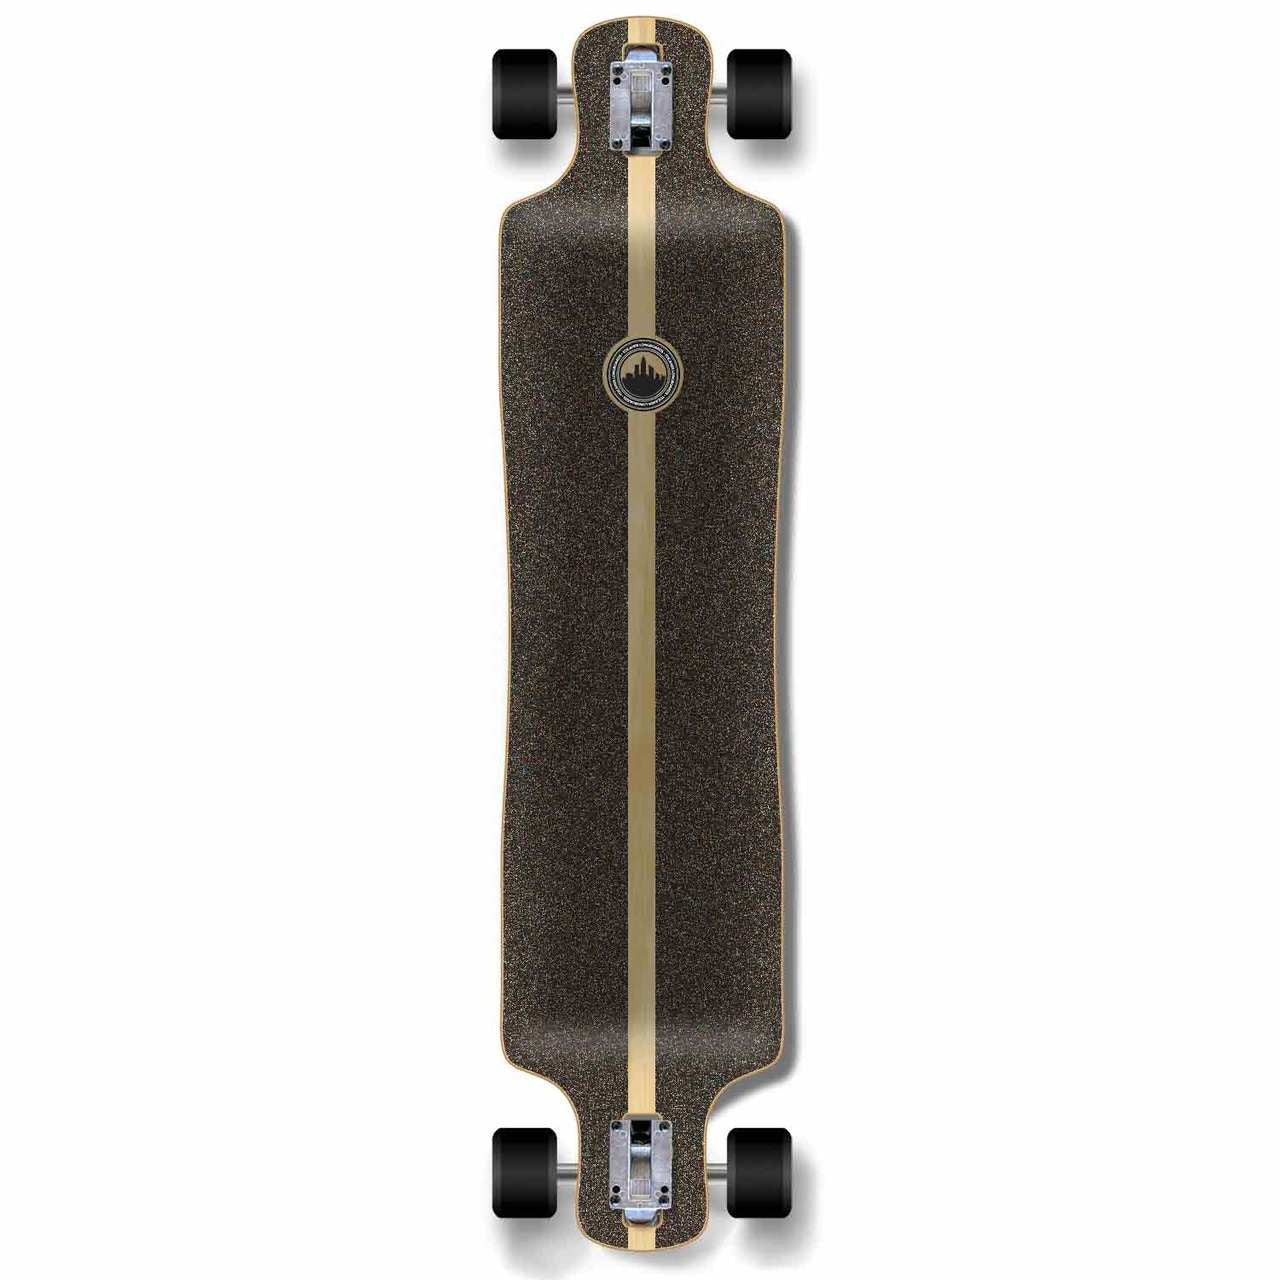 Yocaher Lowrider Longboard Complete - New York